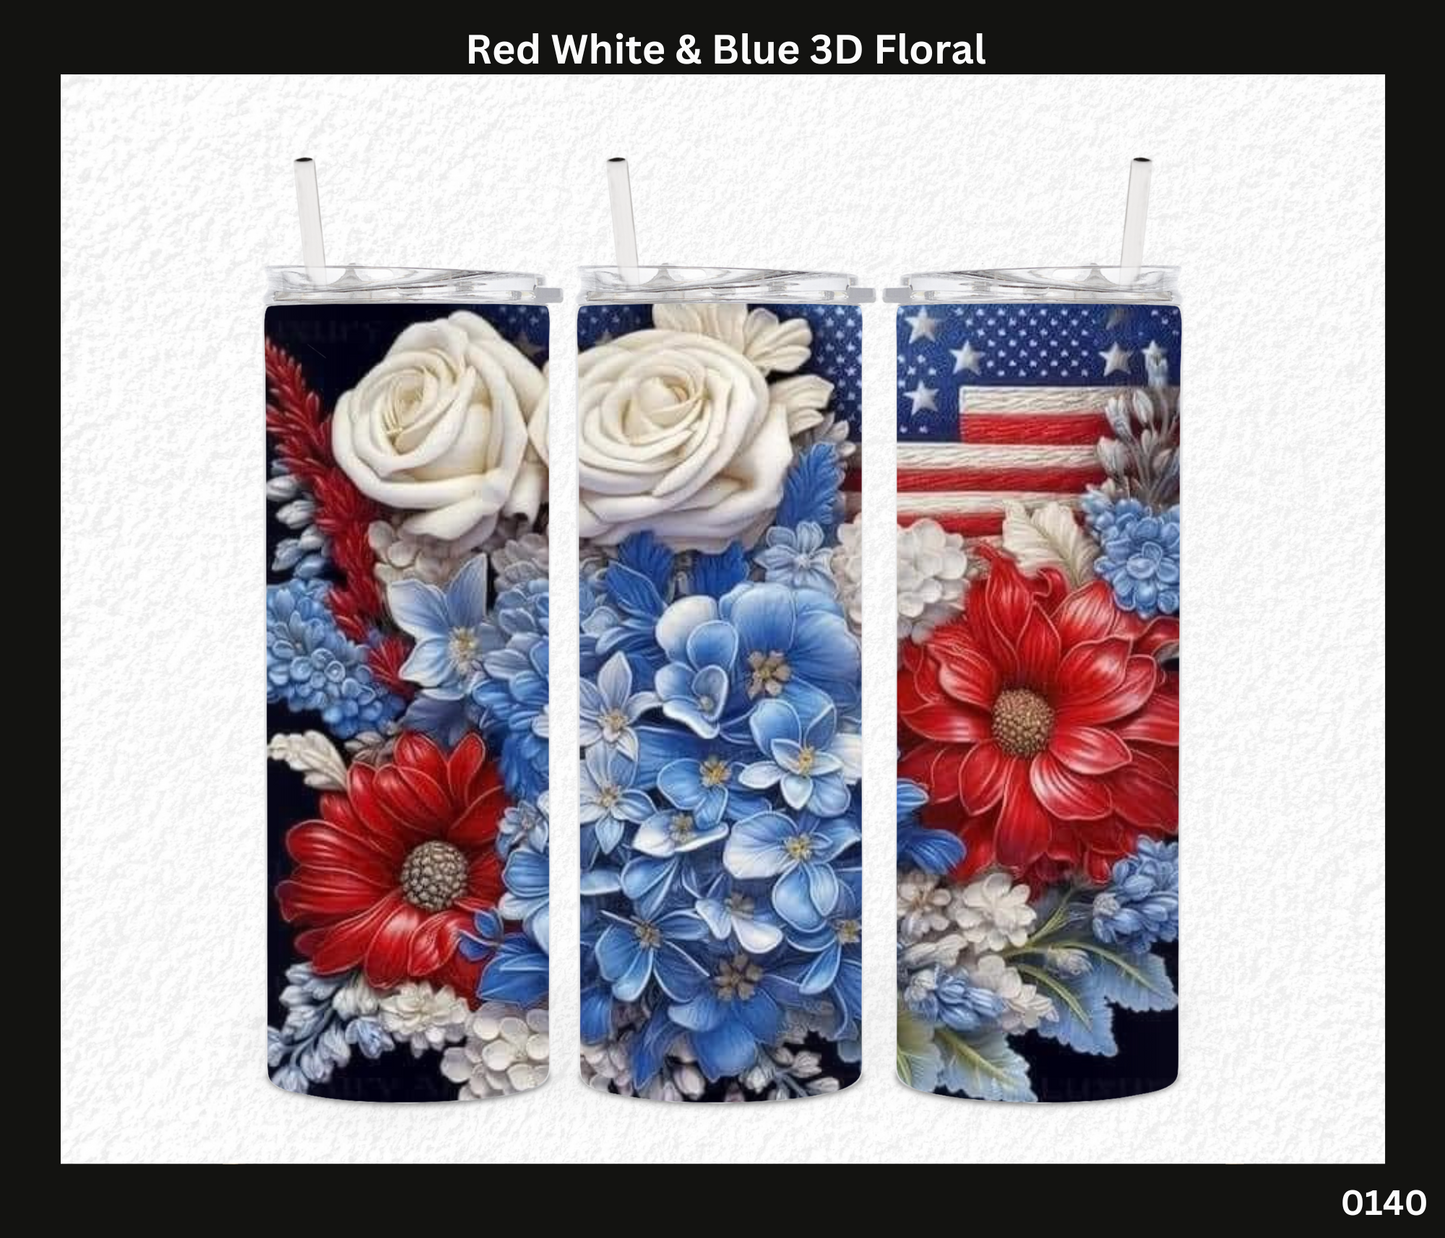 Red White & Blue 3D Floral